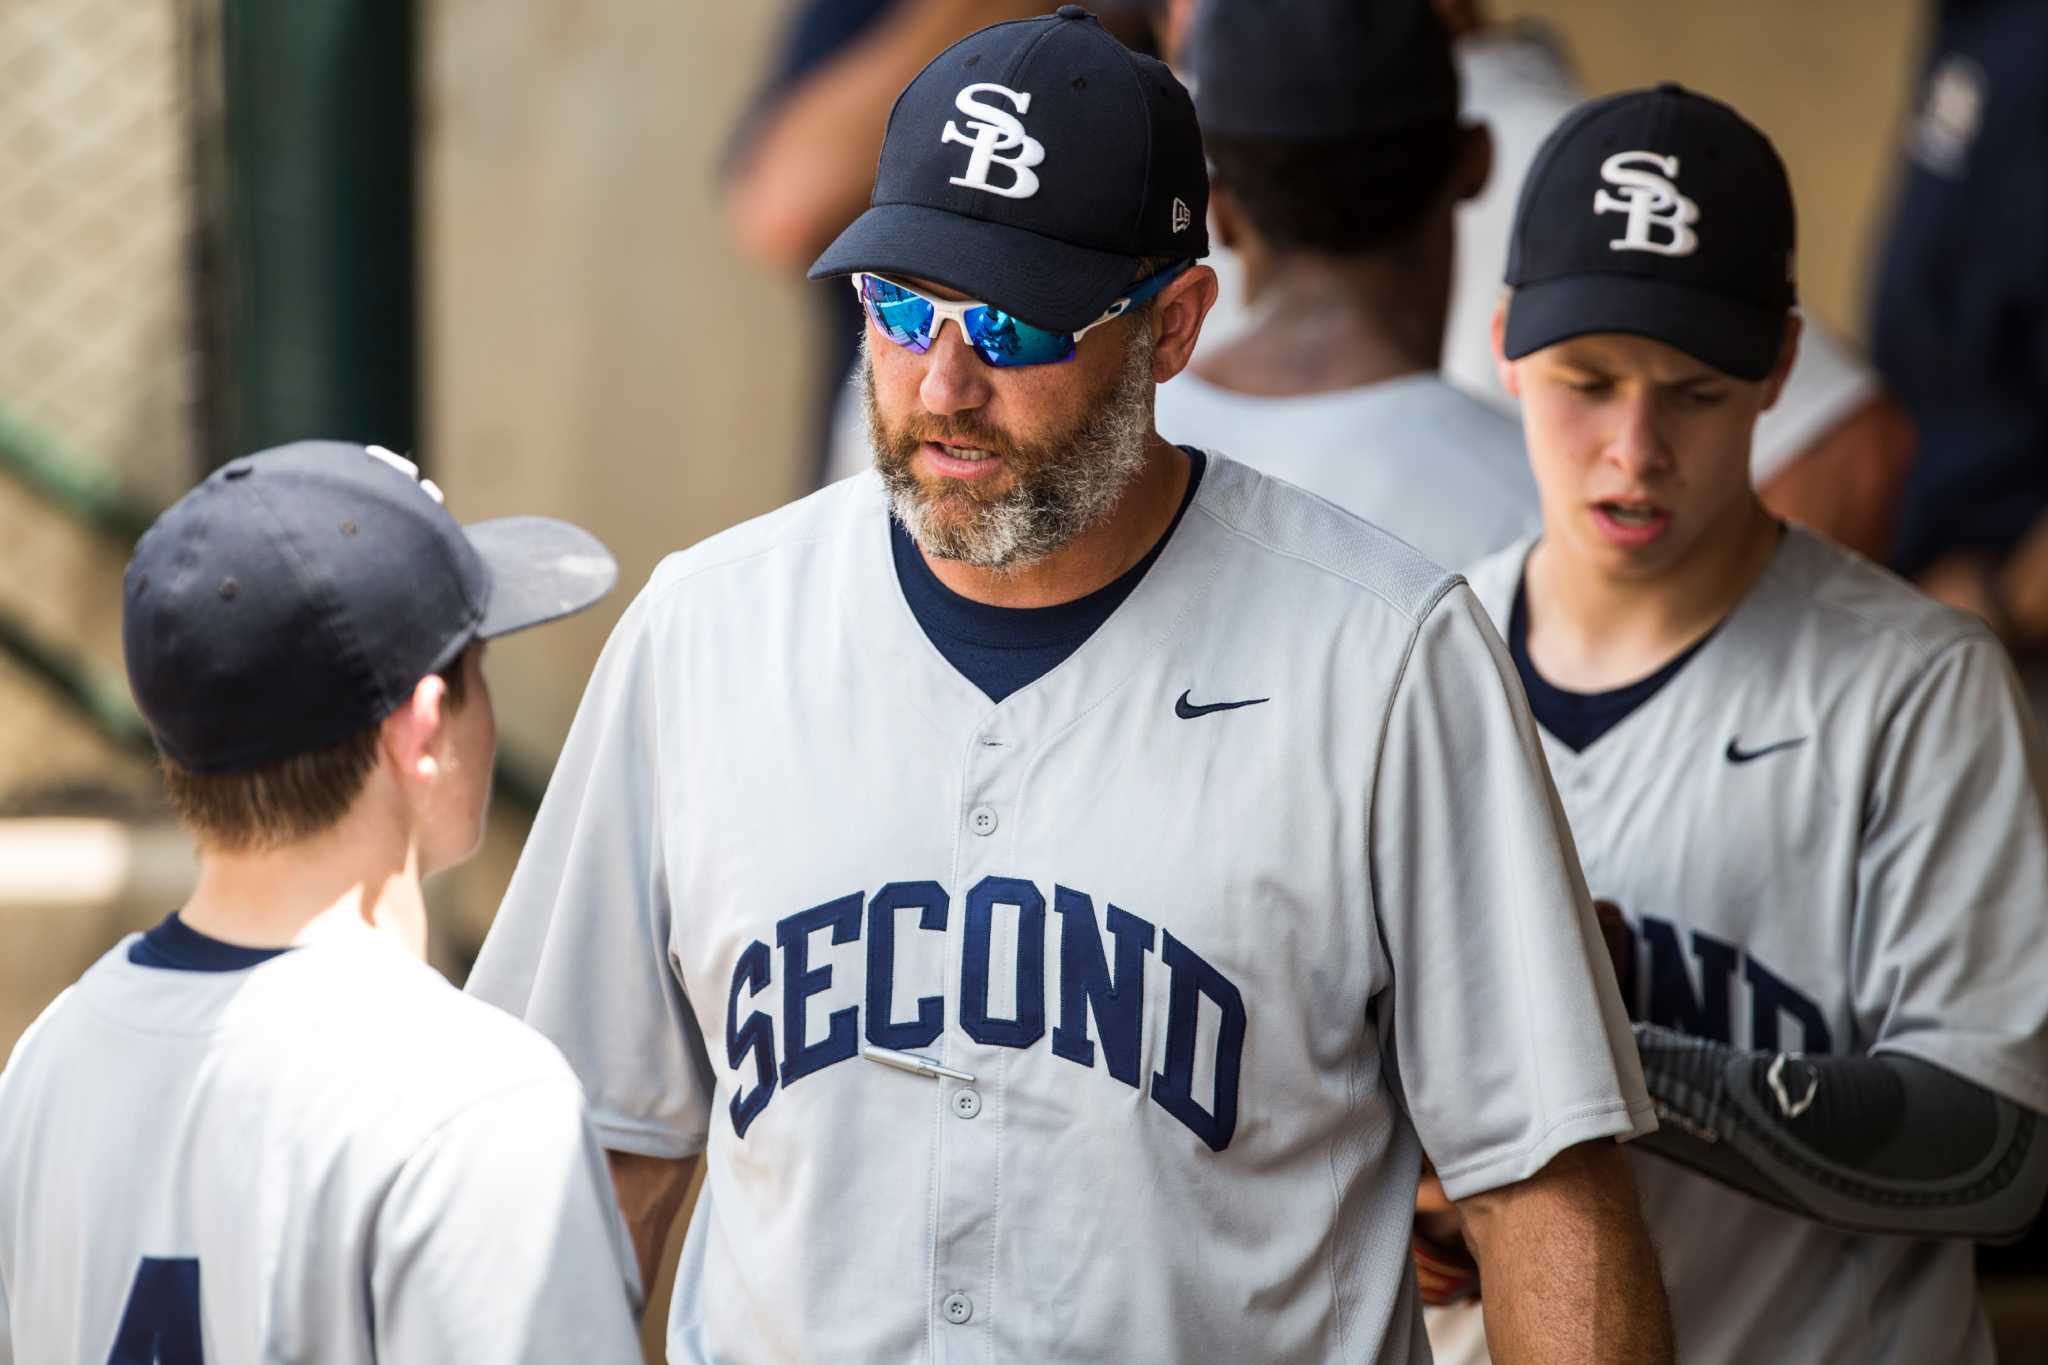 Rice aims to hire a baseball coach by next week